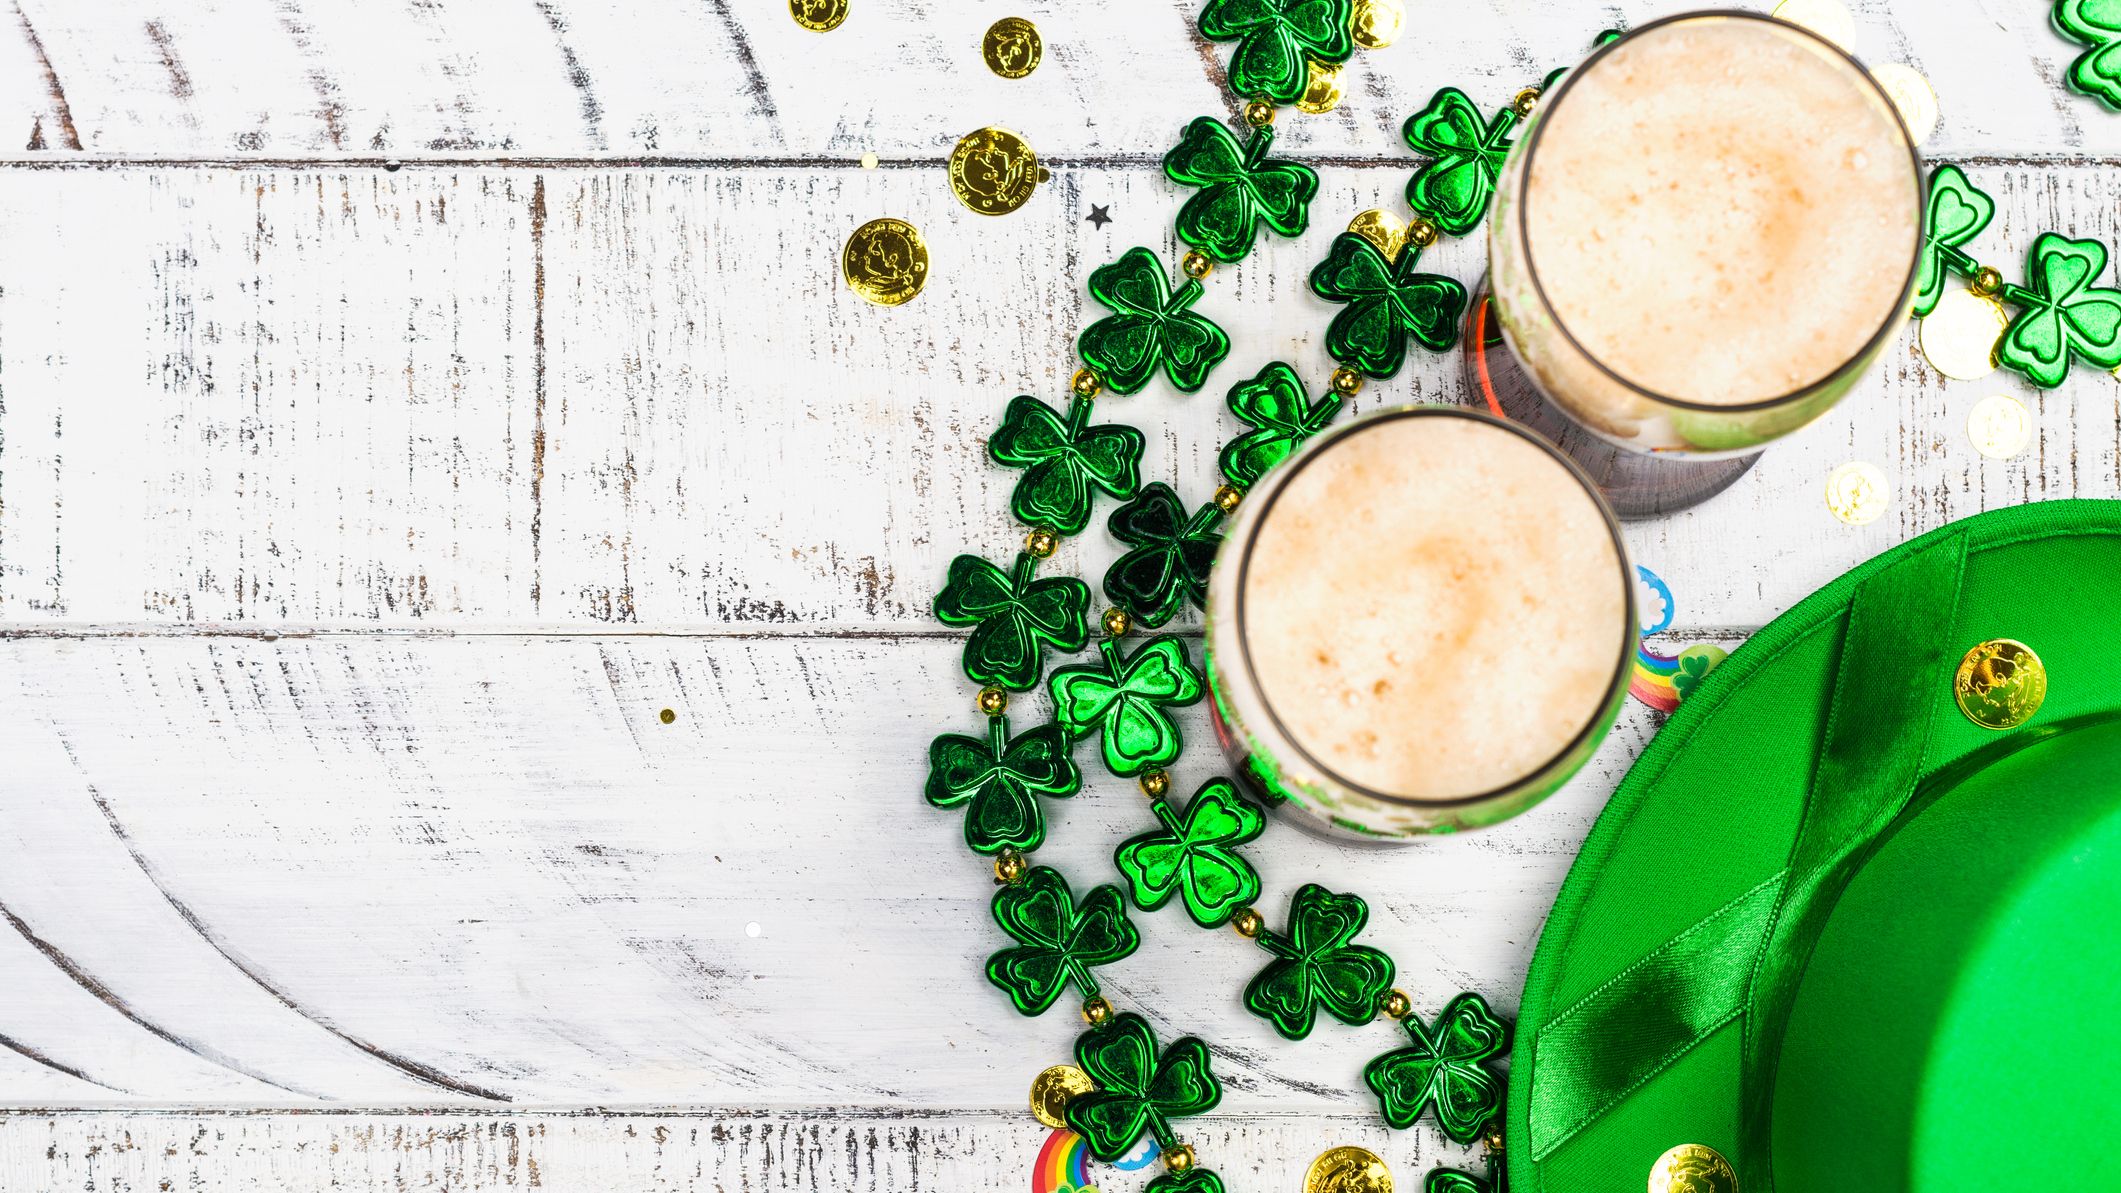 12 Things You Can Make Green for St. Patrick's Day